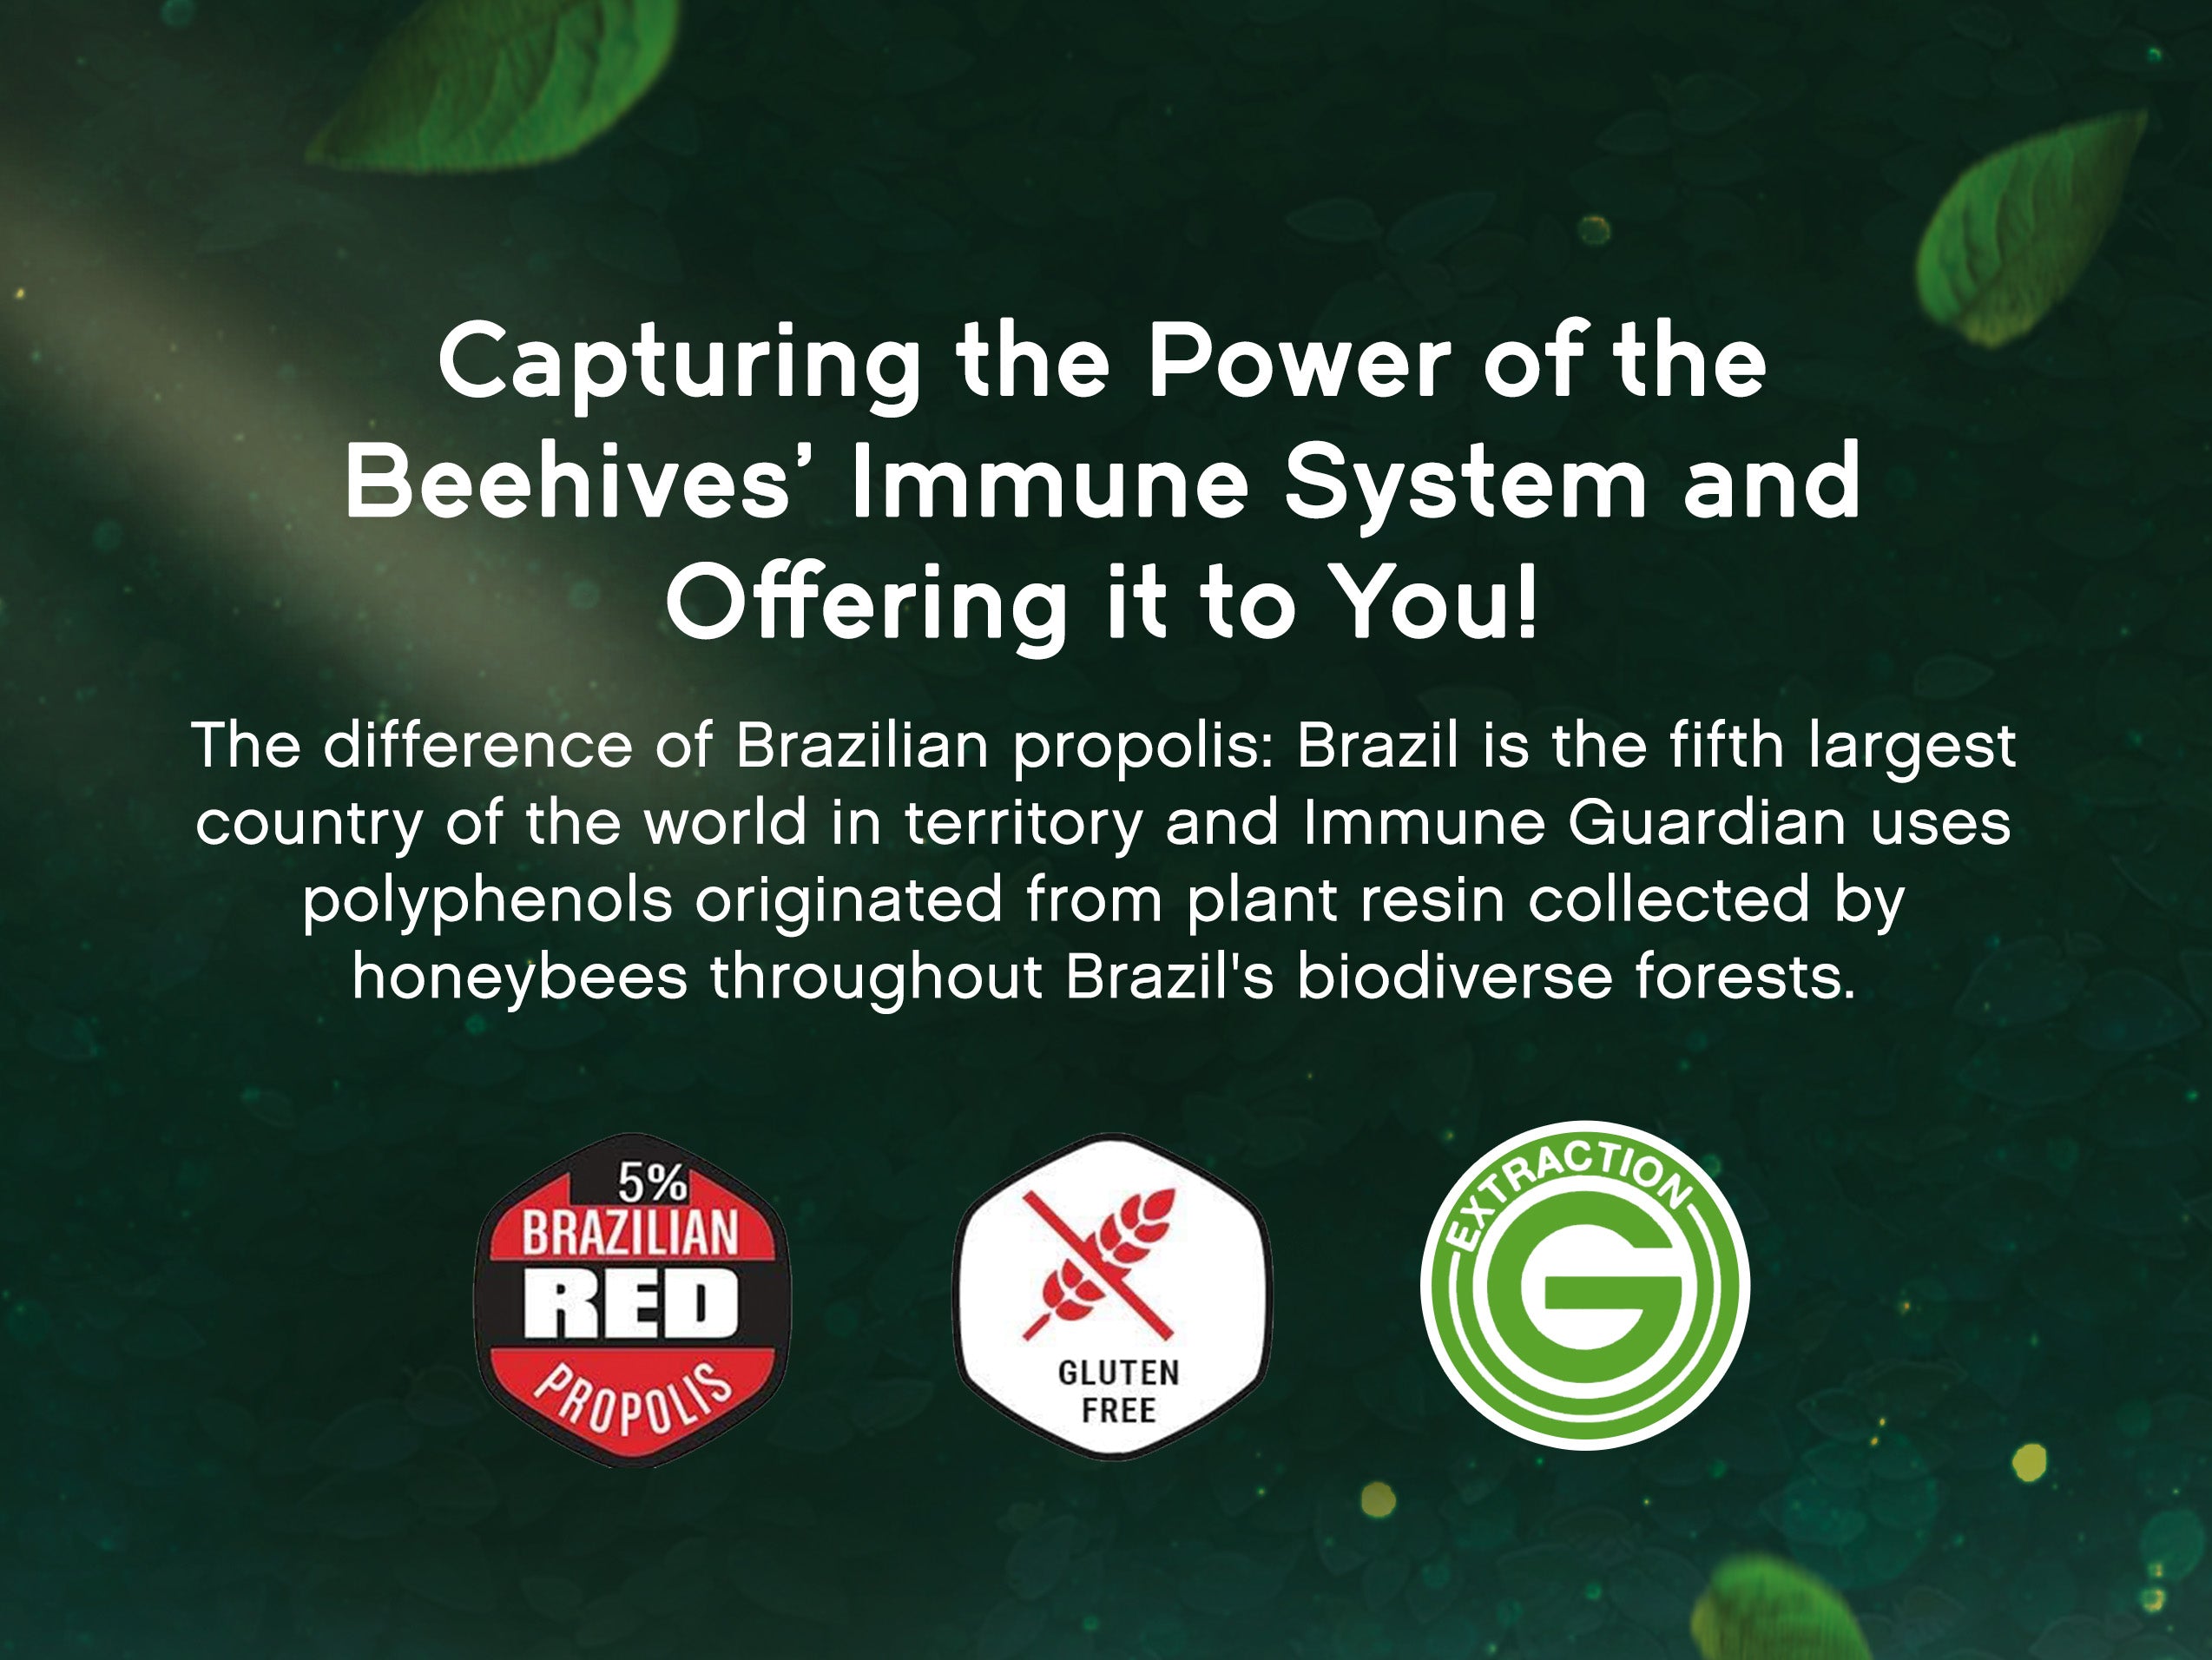 Immune Guardian – Your high dose of bee propolis to support your immune system* every day and at onset